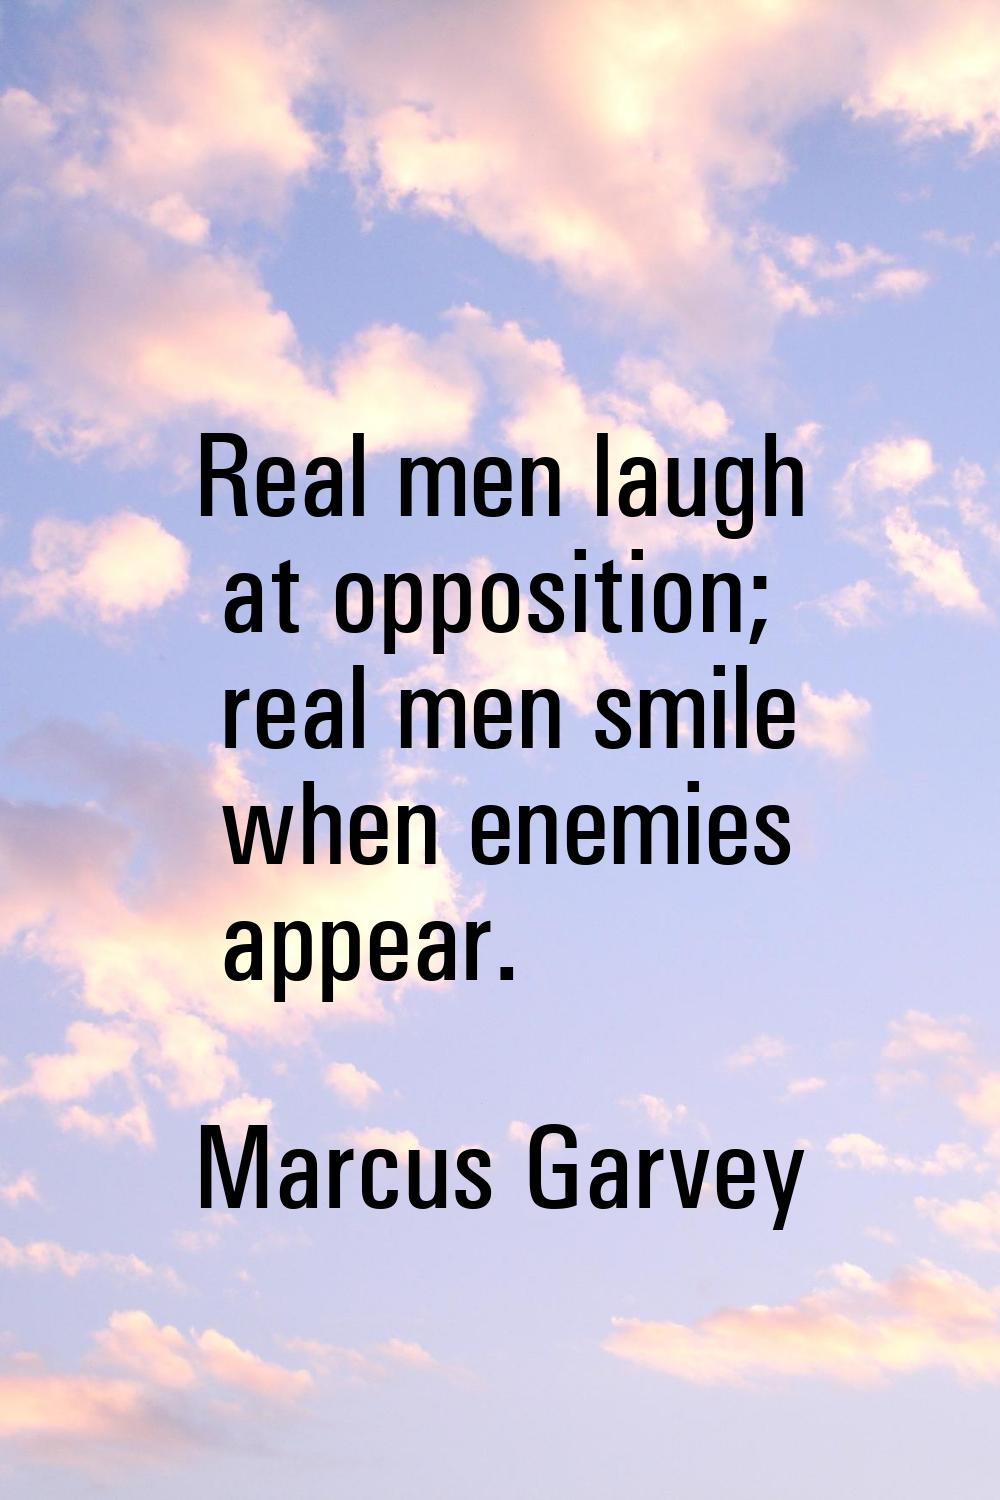 Real men laugh at opposition; real men smile when enemies appear.